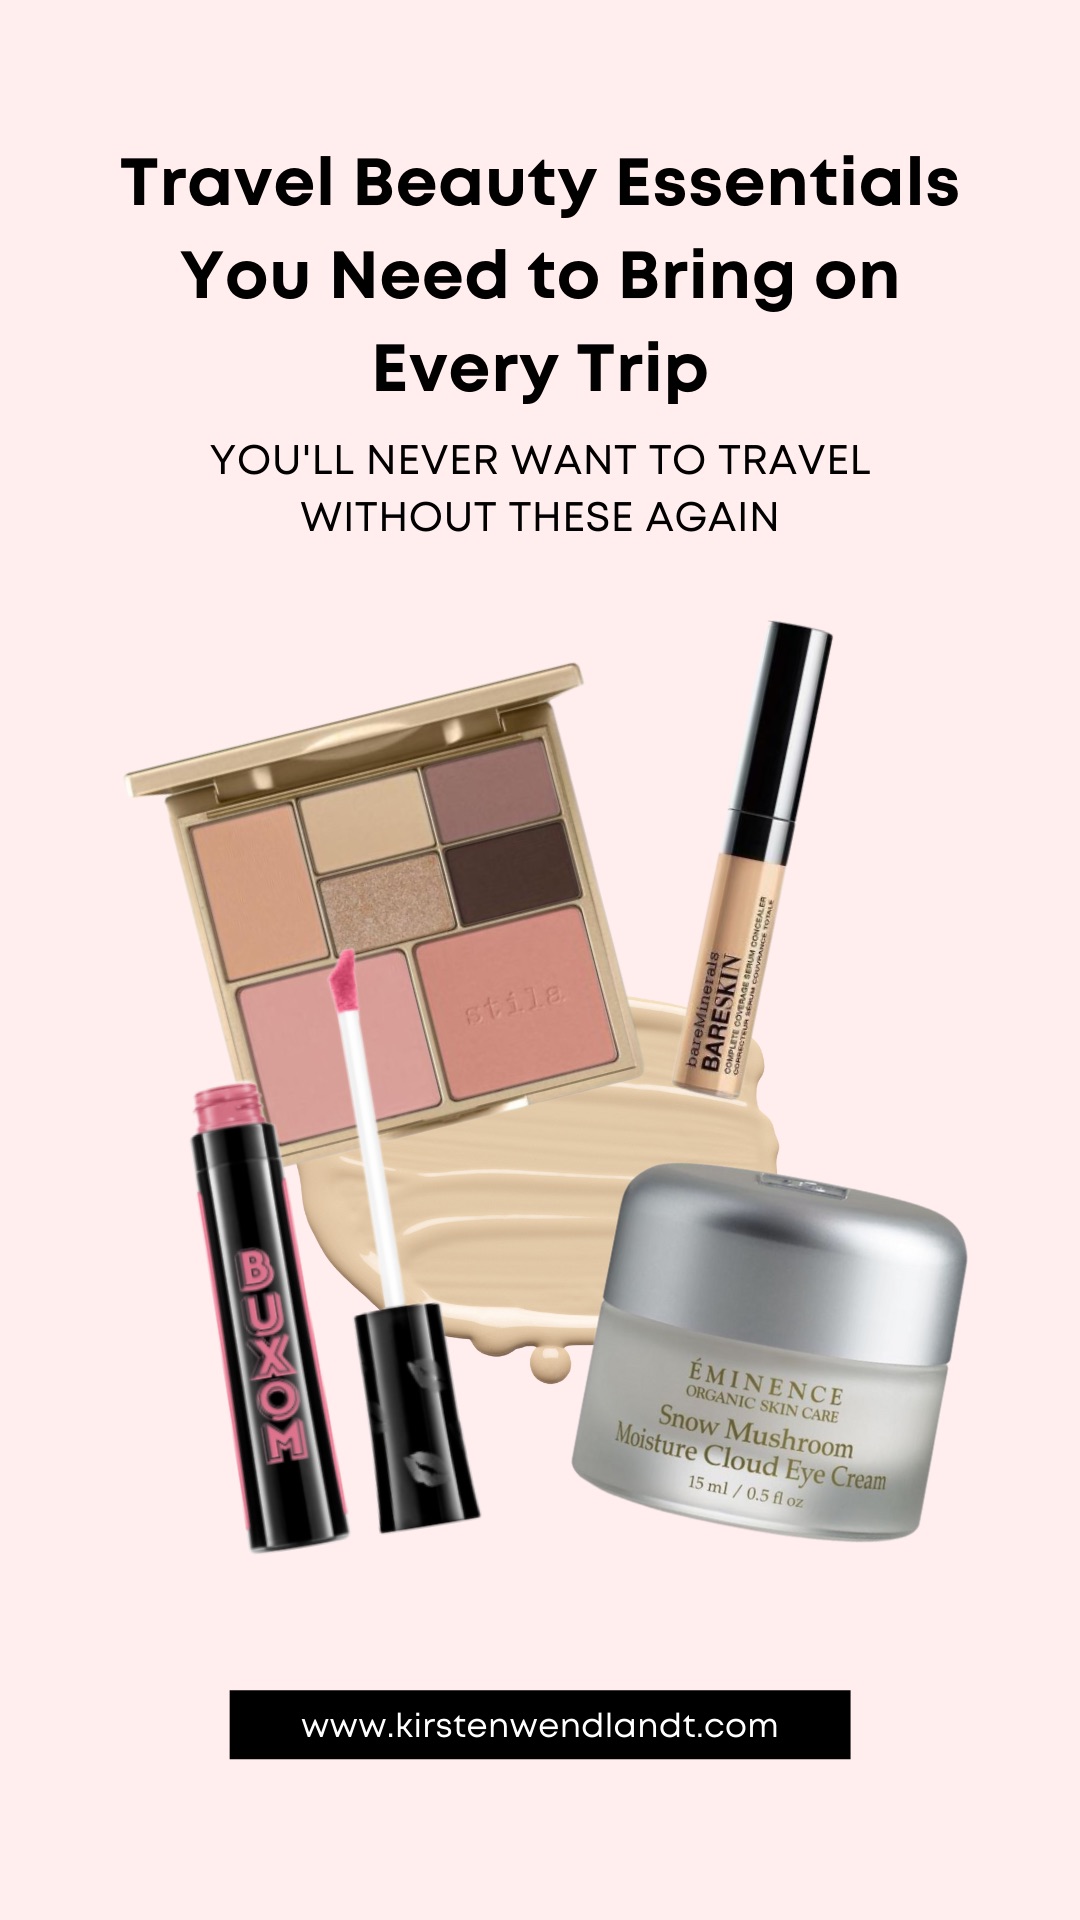 We all know beauty products can really weigh a suitcase down, and I've had to learn what's the best of the best in packable products to get me through trips from as short as a weekend away to month long expeditions. I wanted to put together this guide to share with you my top travel beauty essentials in hopes that I can help streamline your travel packing routine too. Plus read on to find out where you can get all your skincare and makeup with free shipping in Canada.